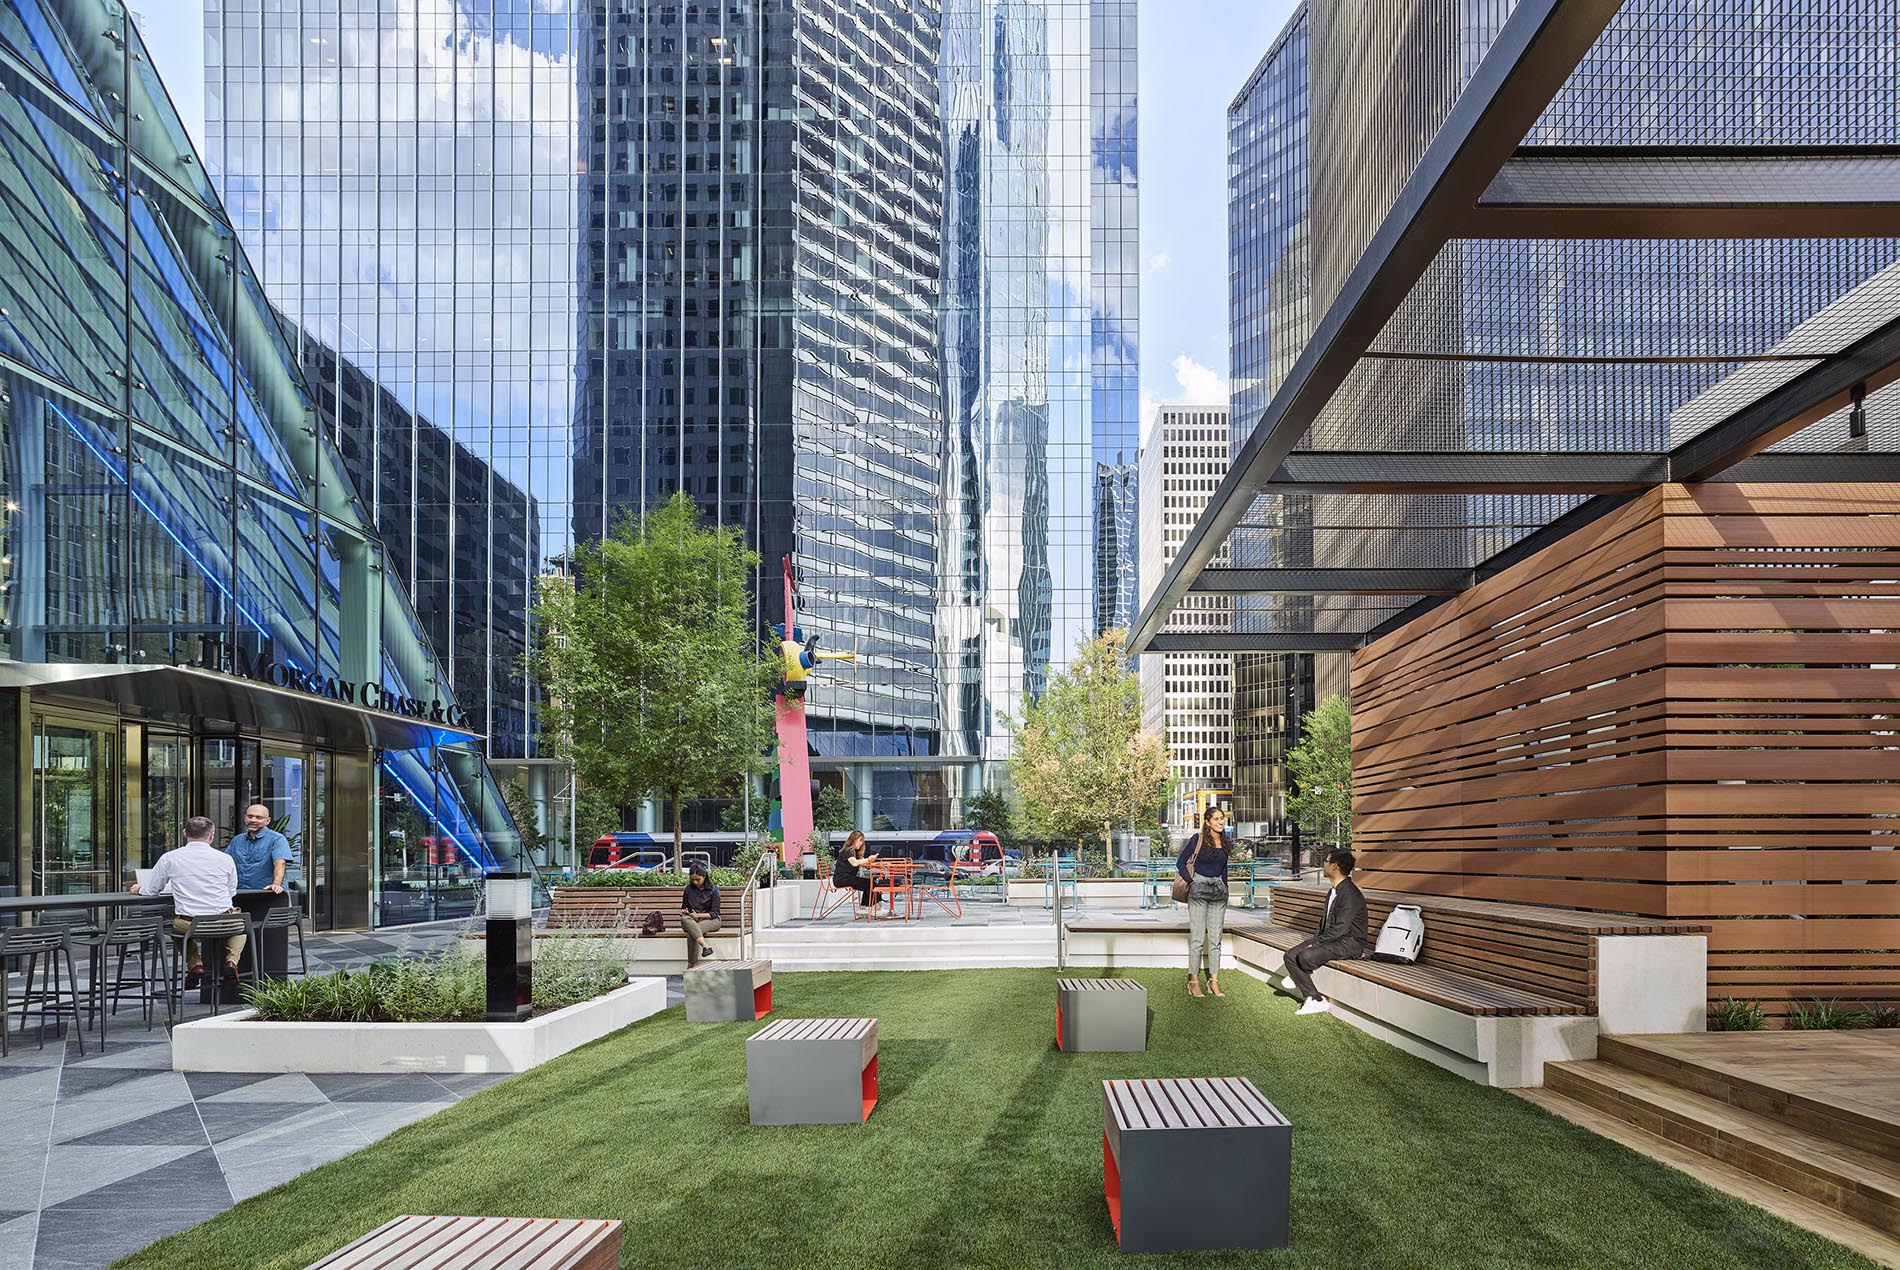 Rethinking Public Space Brings New Life to Cities - HOK